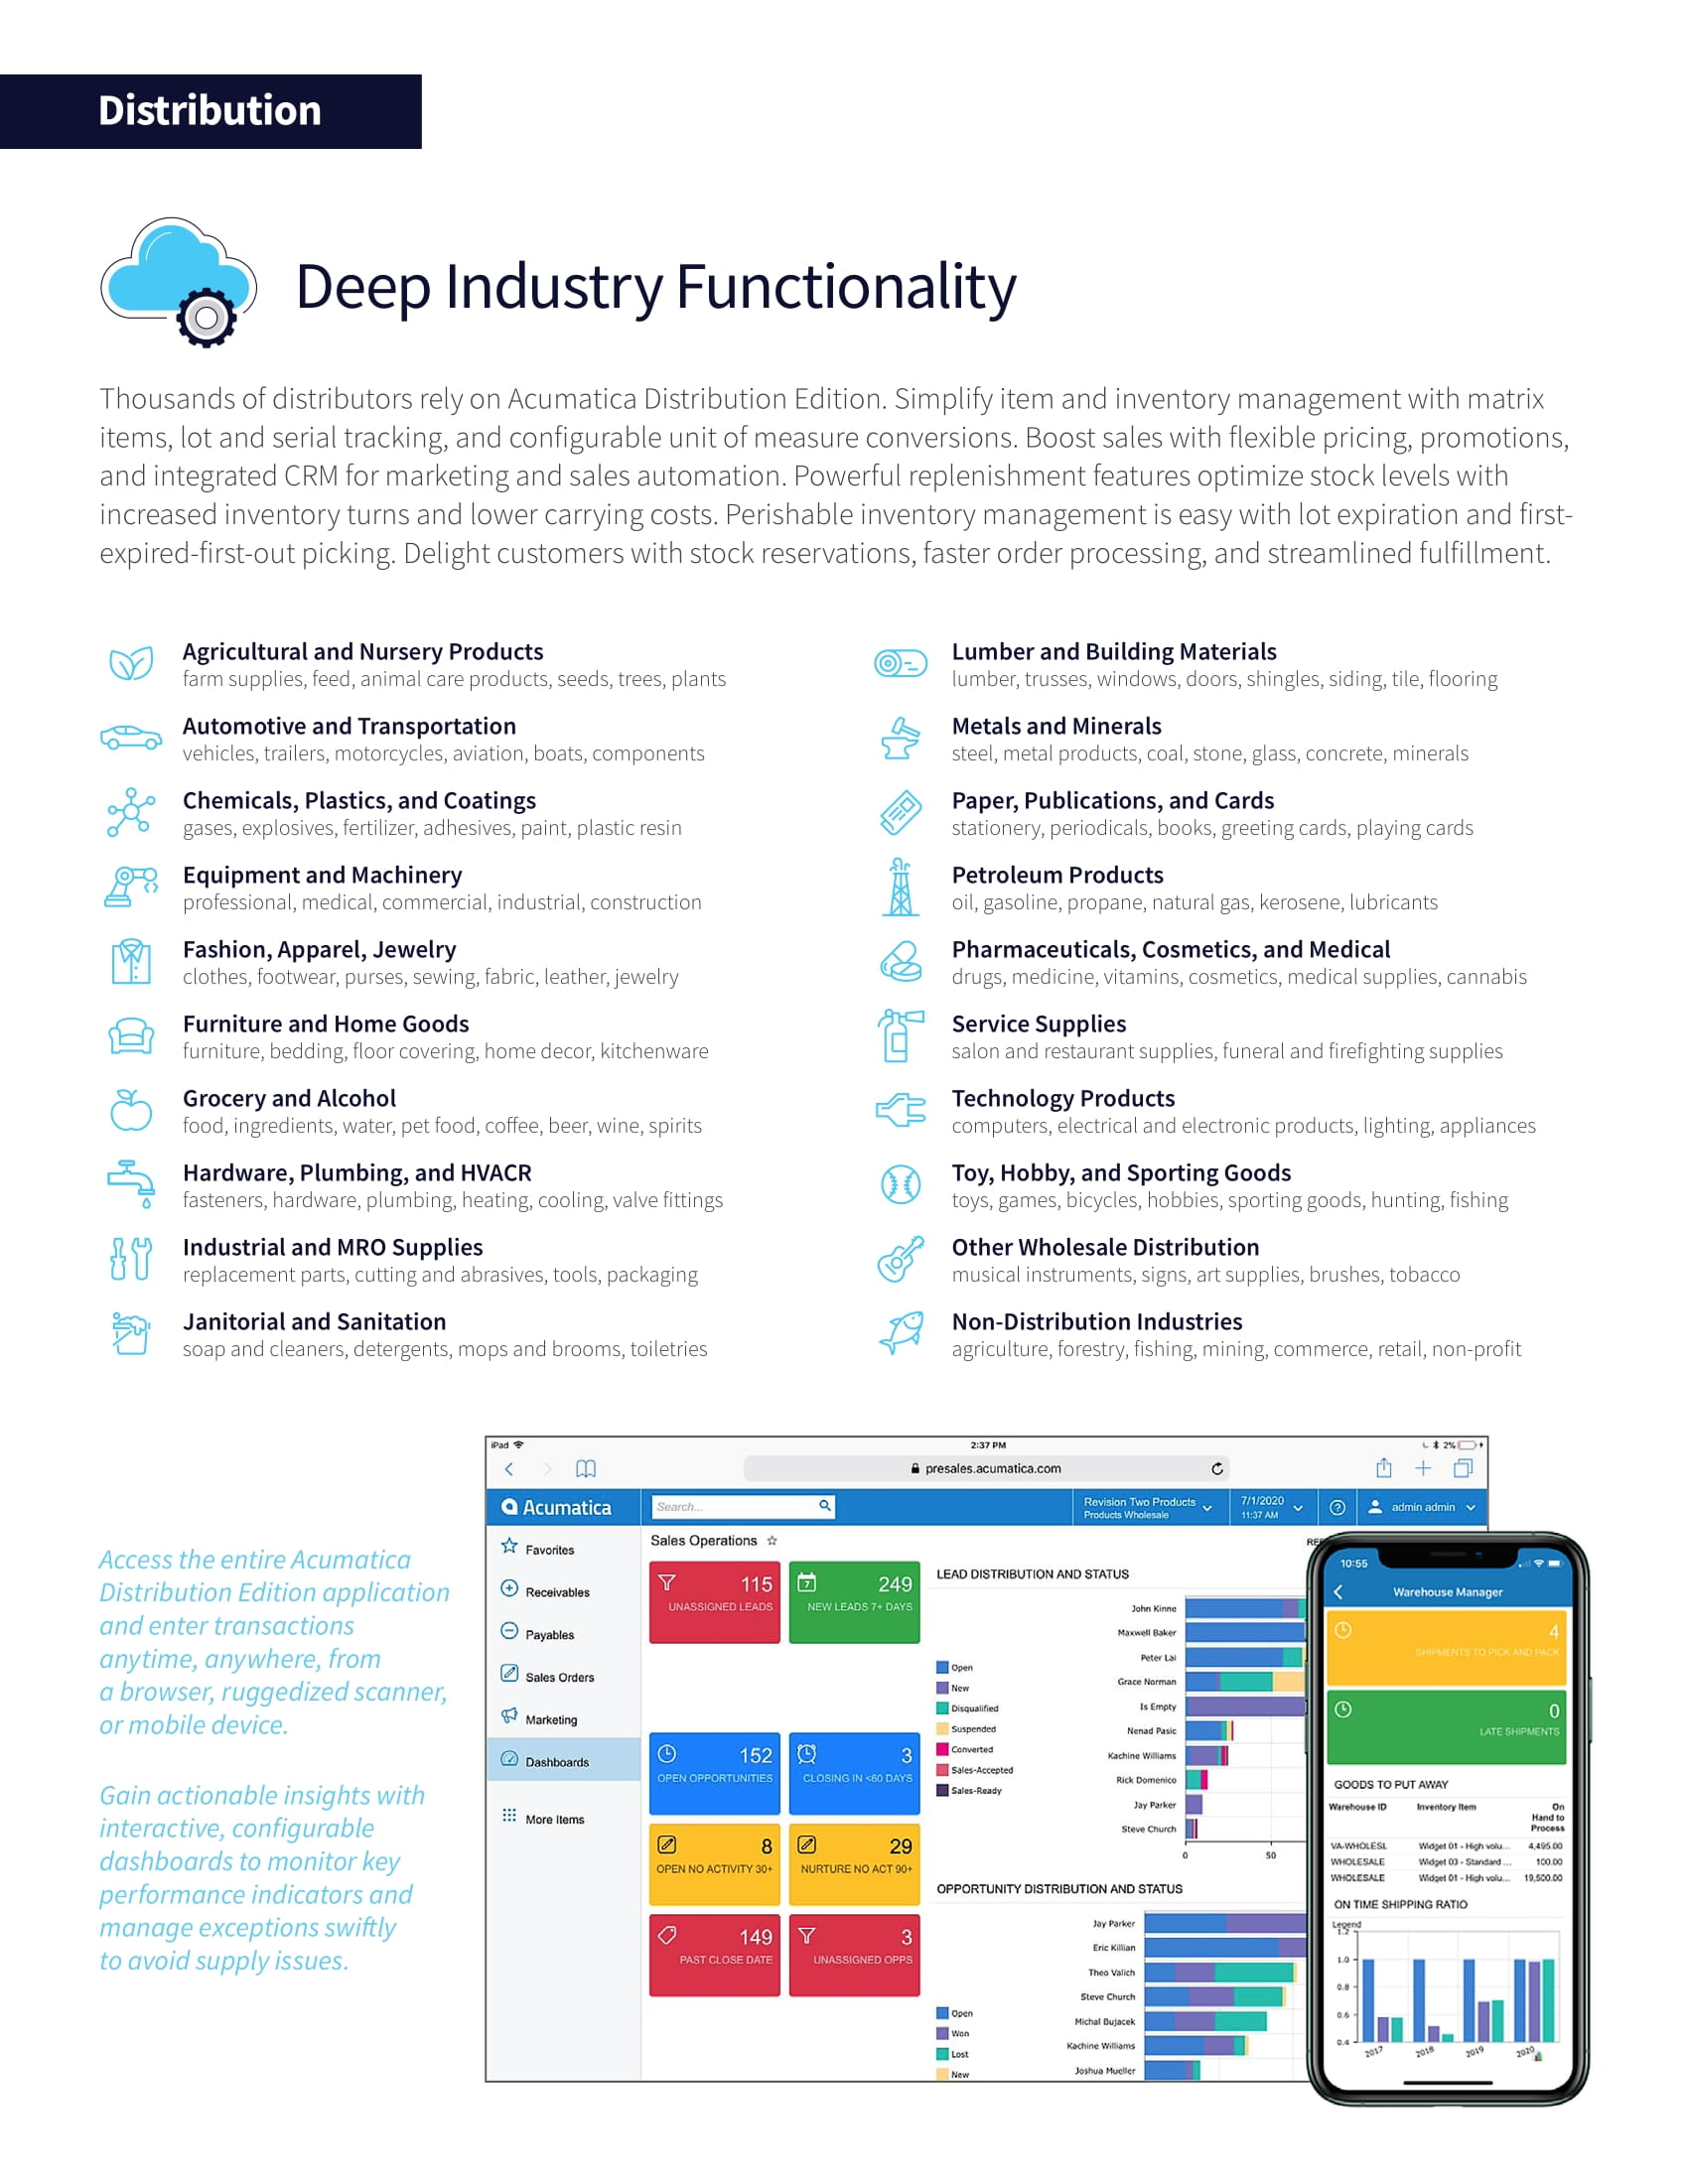 Distribution ERP: Find the Best Blend of Functionality and Simplicity, page 2